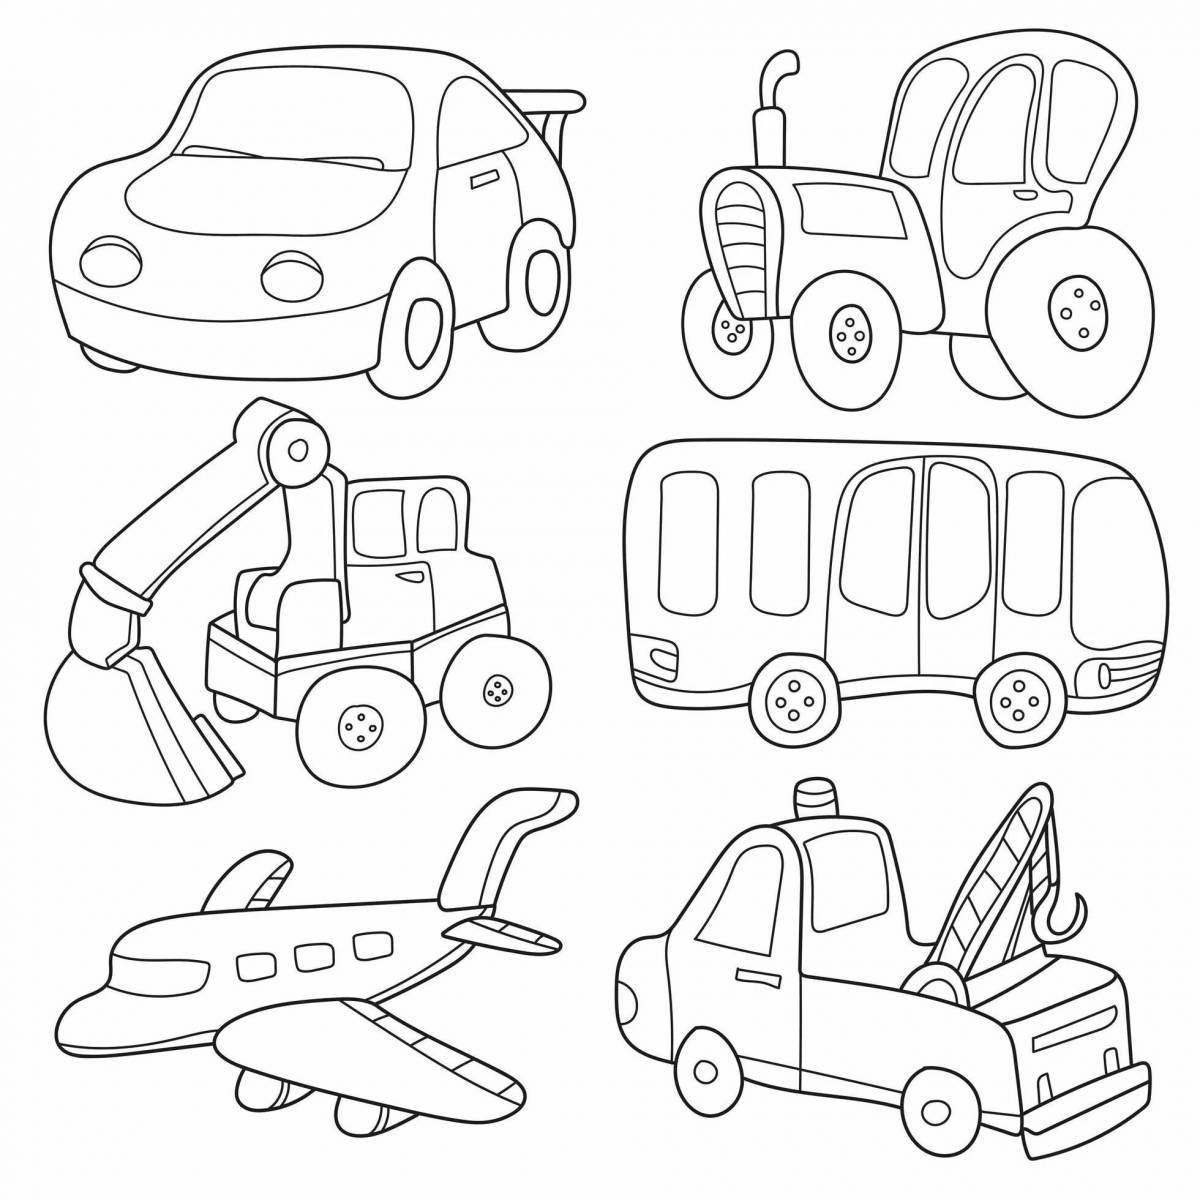 Living transport coloring book